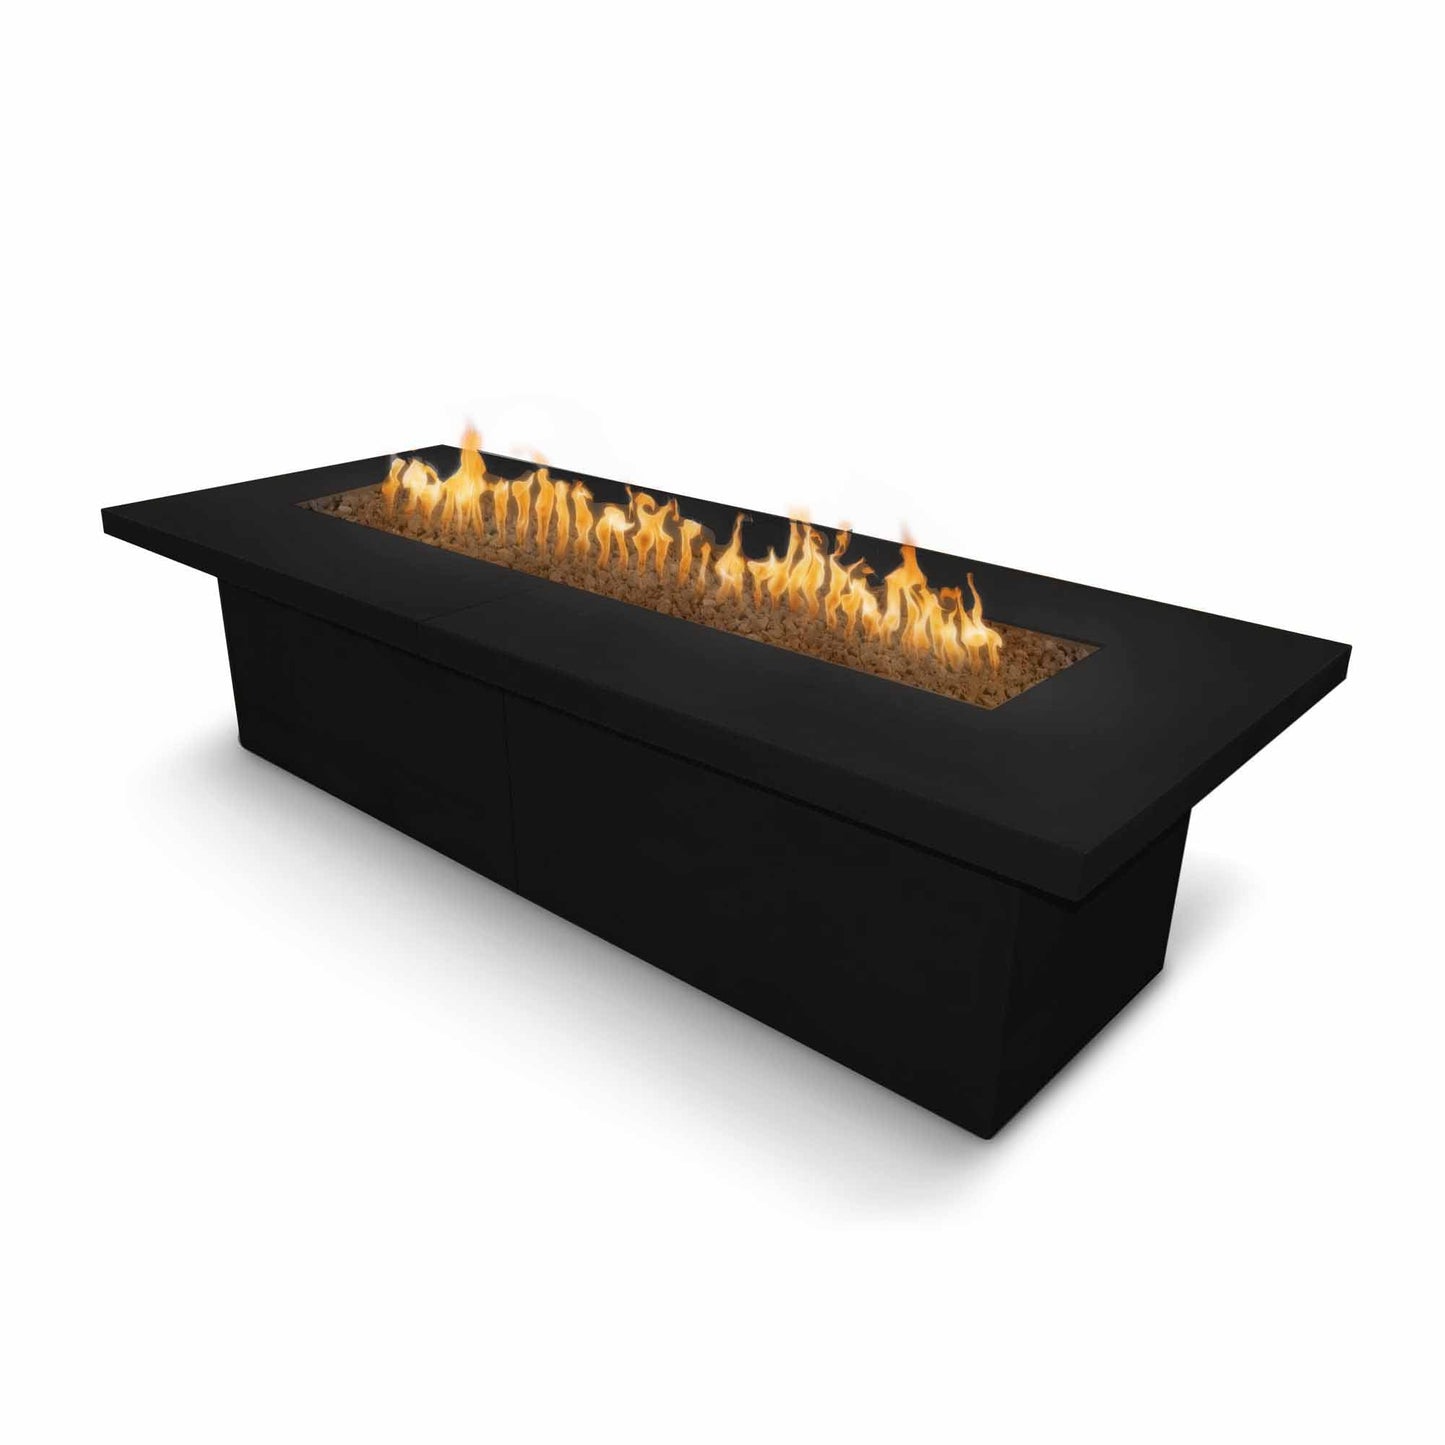 The Outdoor Plus Rectangular Newport 144" Silver Vein Powder Coated Metal Liquid Propane Fire Pit with 110V Electronic Ignition